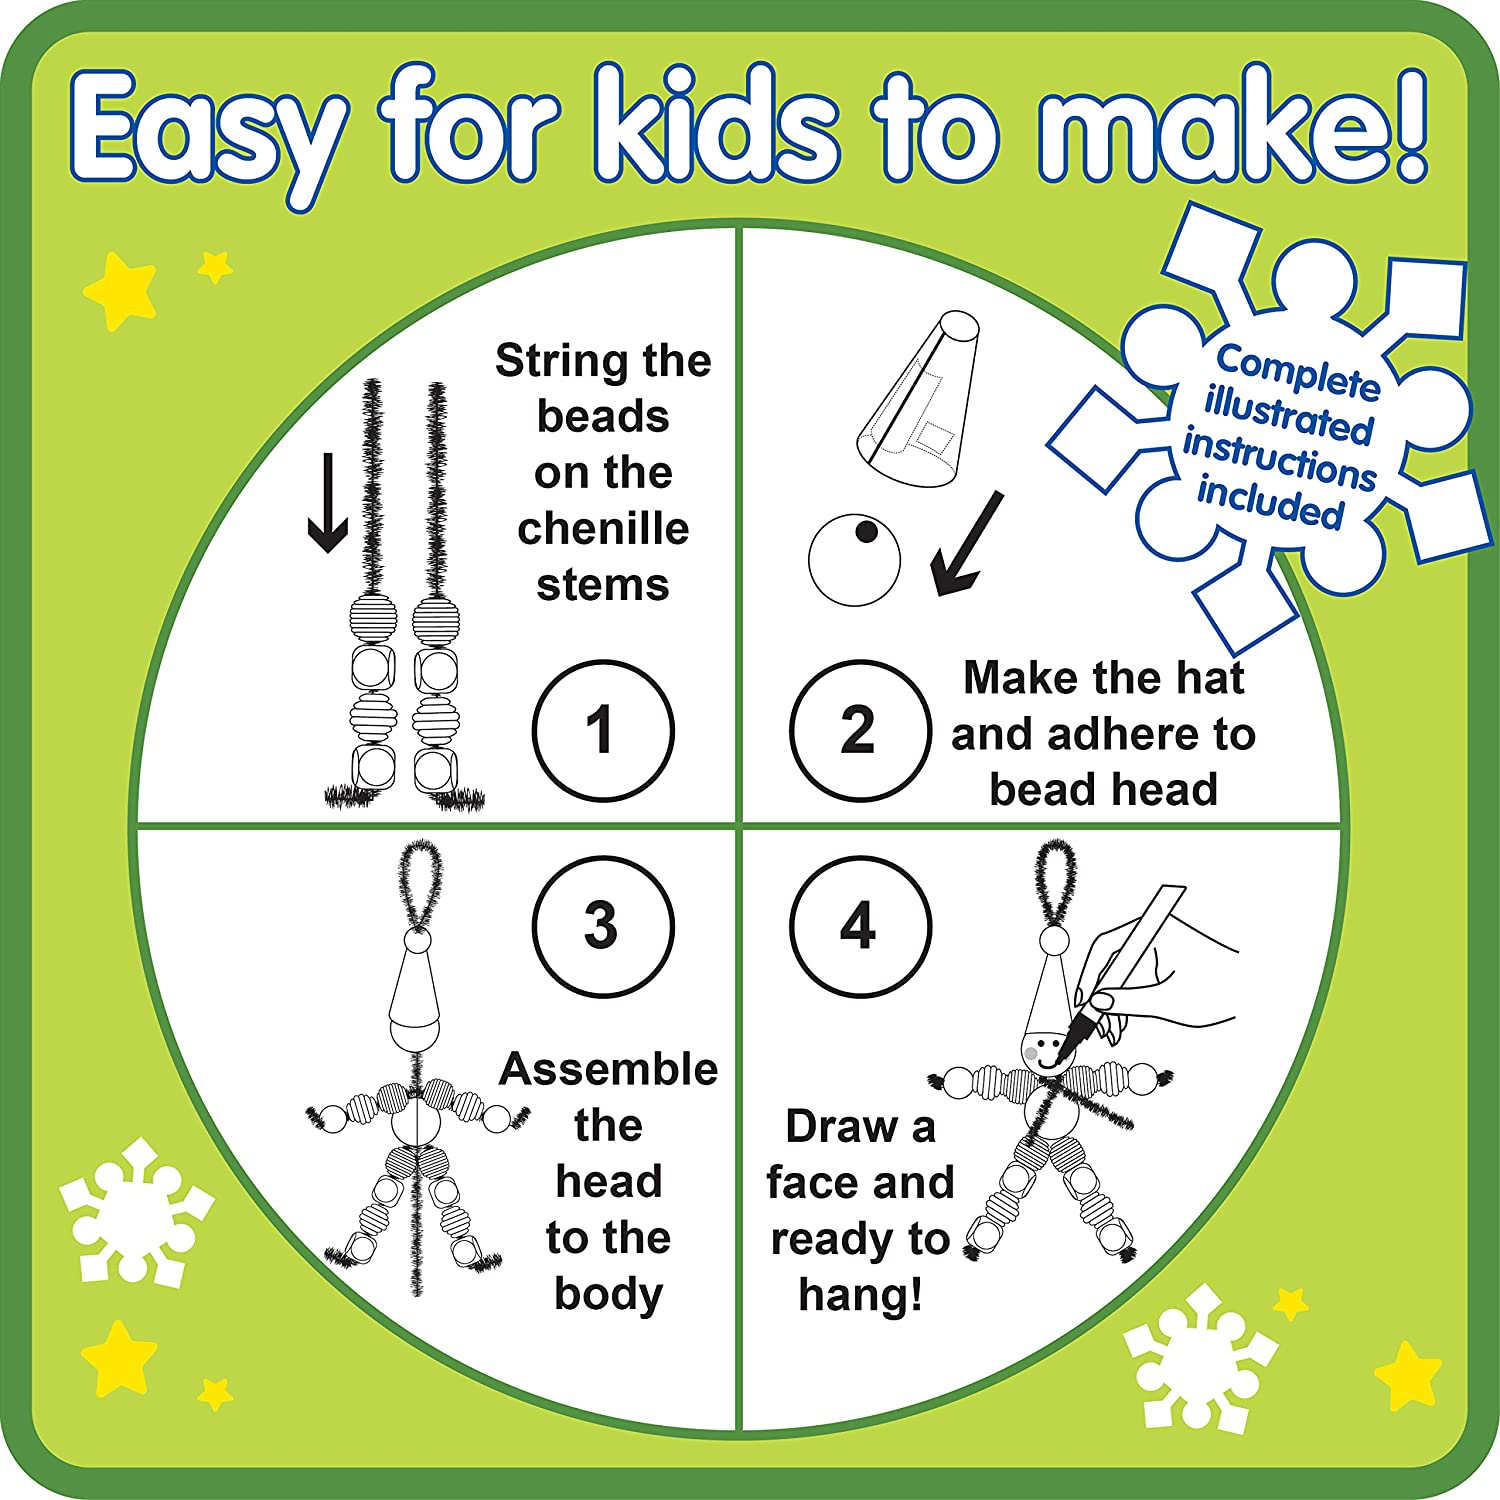 READY 2 LEARN Christmas Crafts - Create Your Own Bead Elves - Set of 4 - DIY Ornaments for Kids - Christmas Tree Decoration - All Materials Included